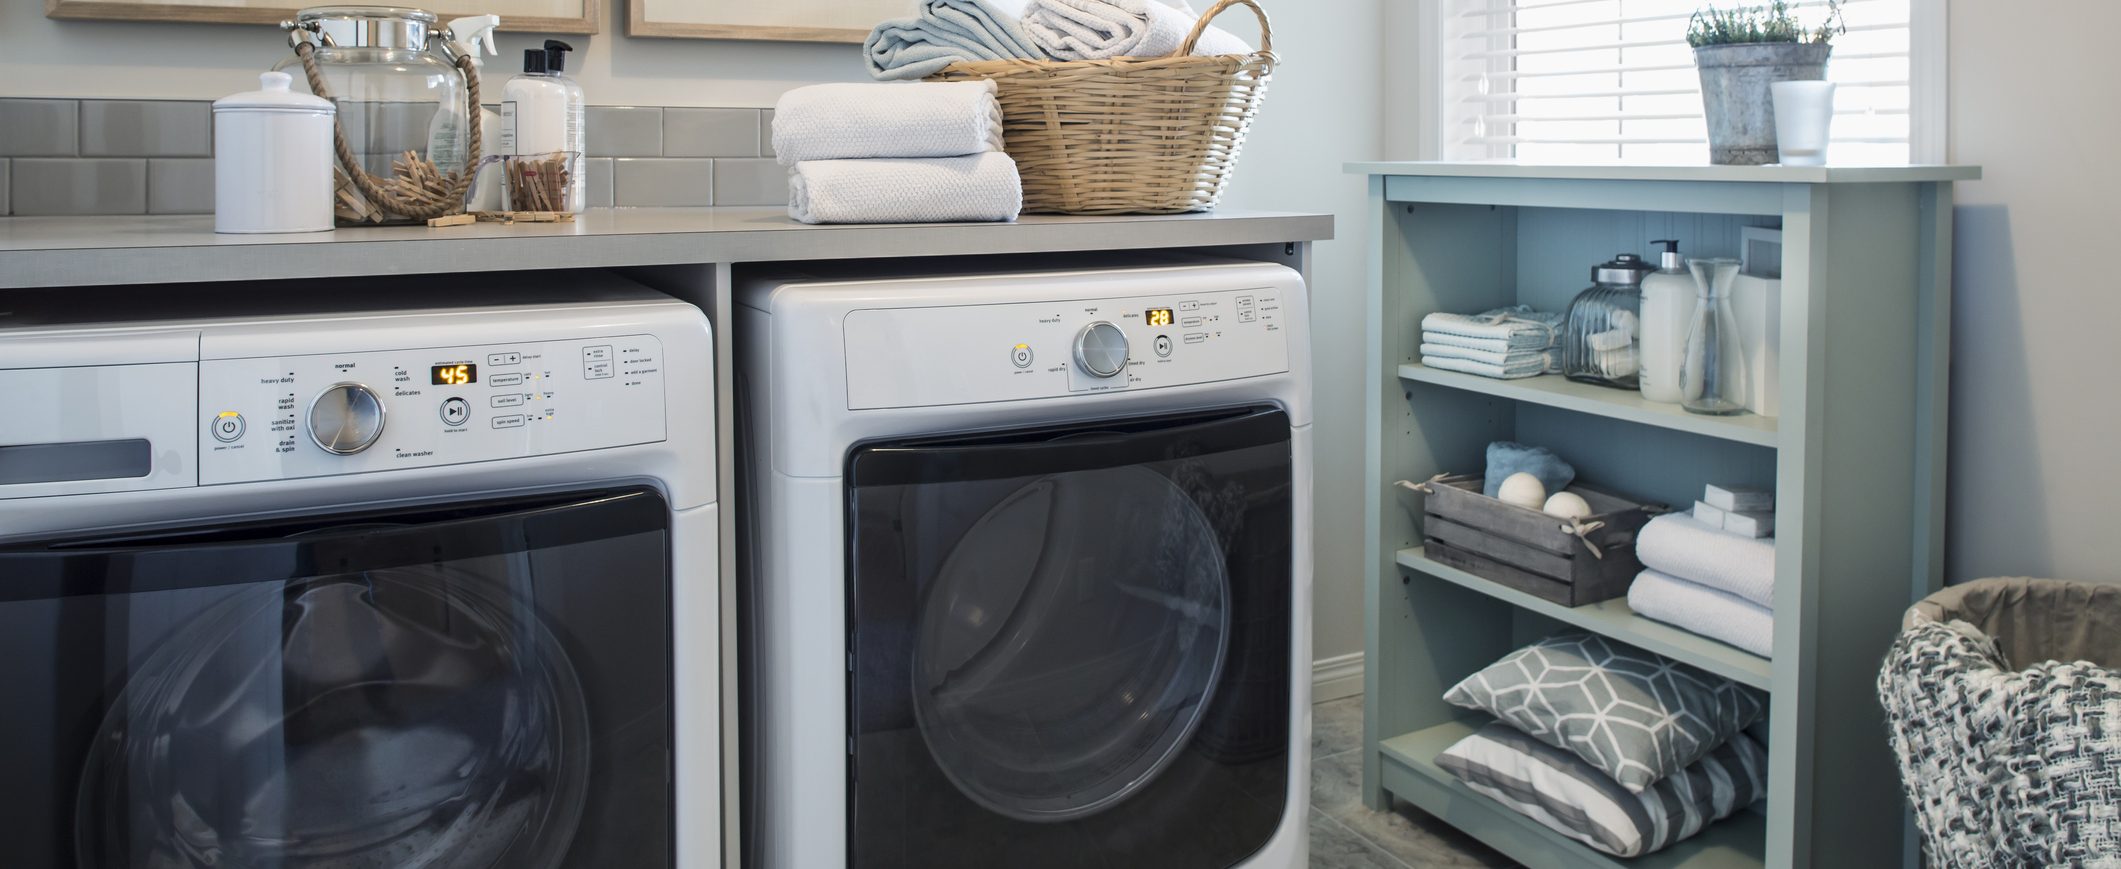 Inside of a laundry room, showing the washer and dryer next to each other.